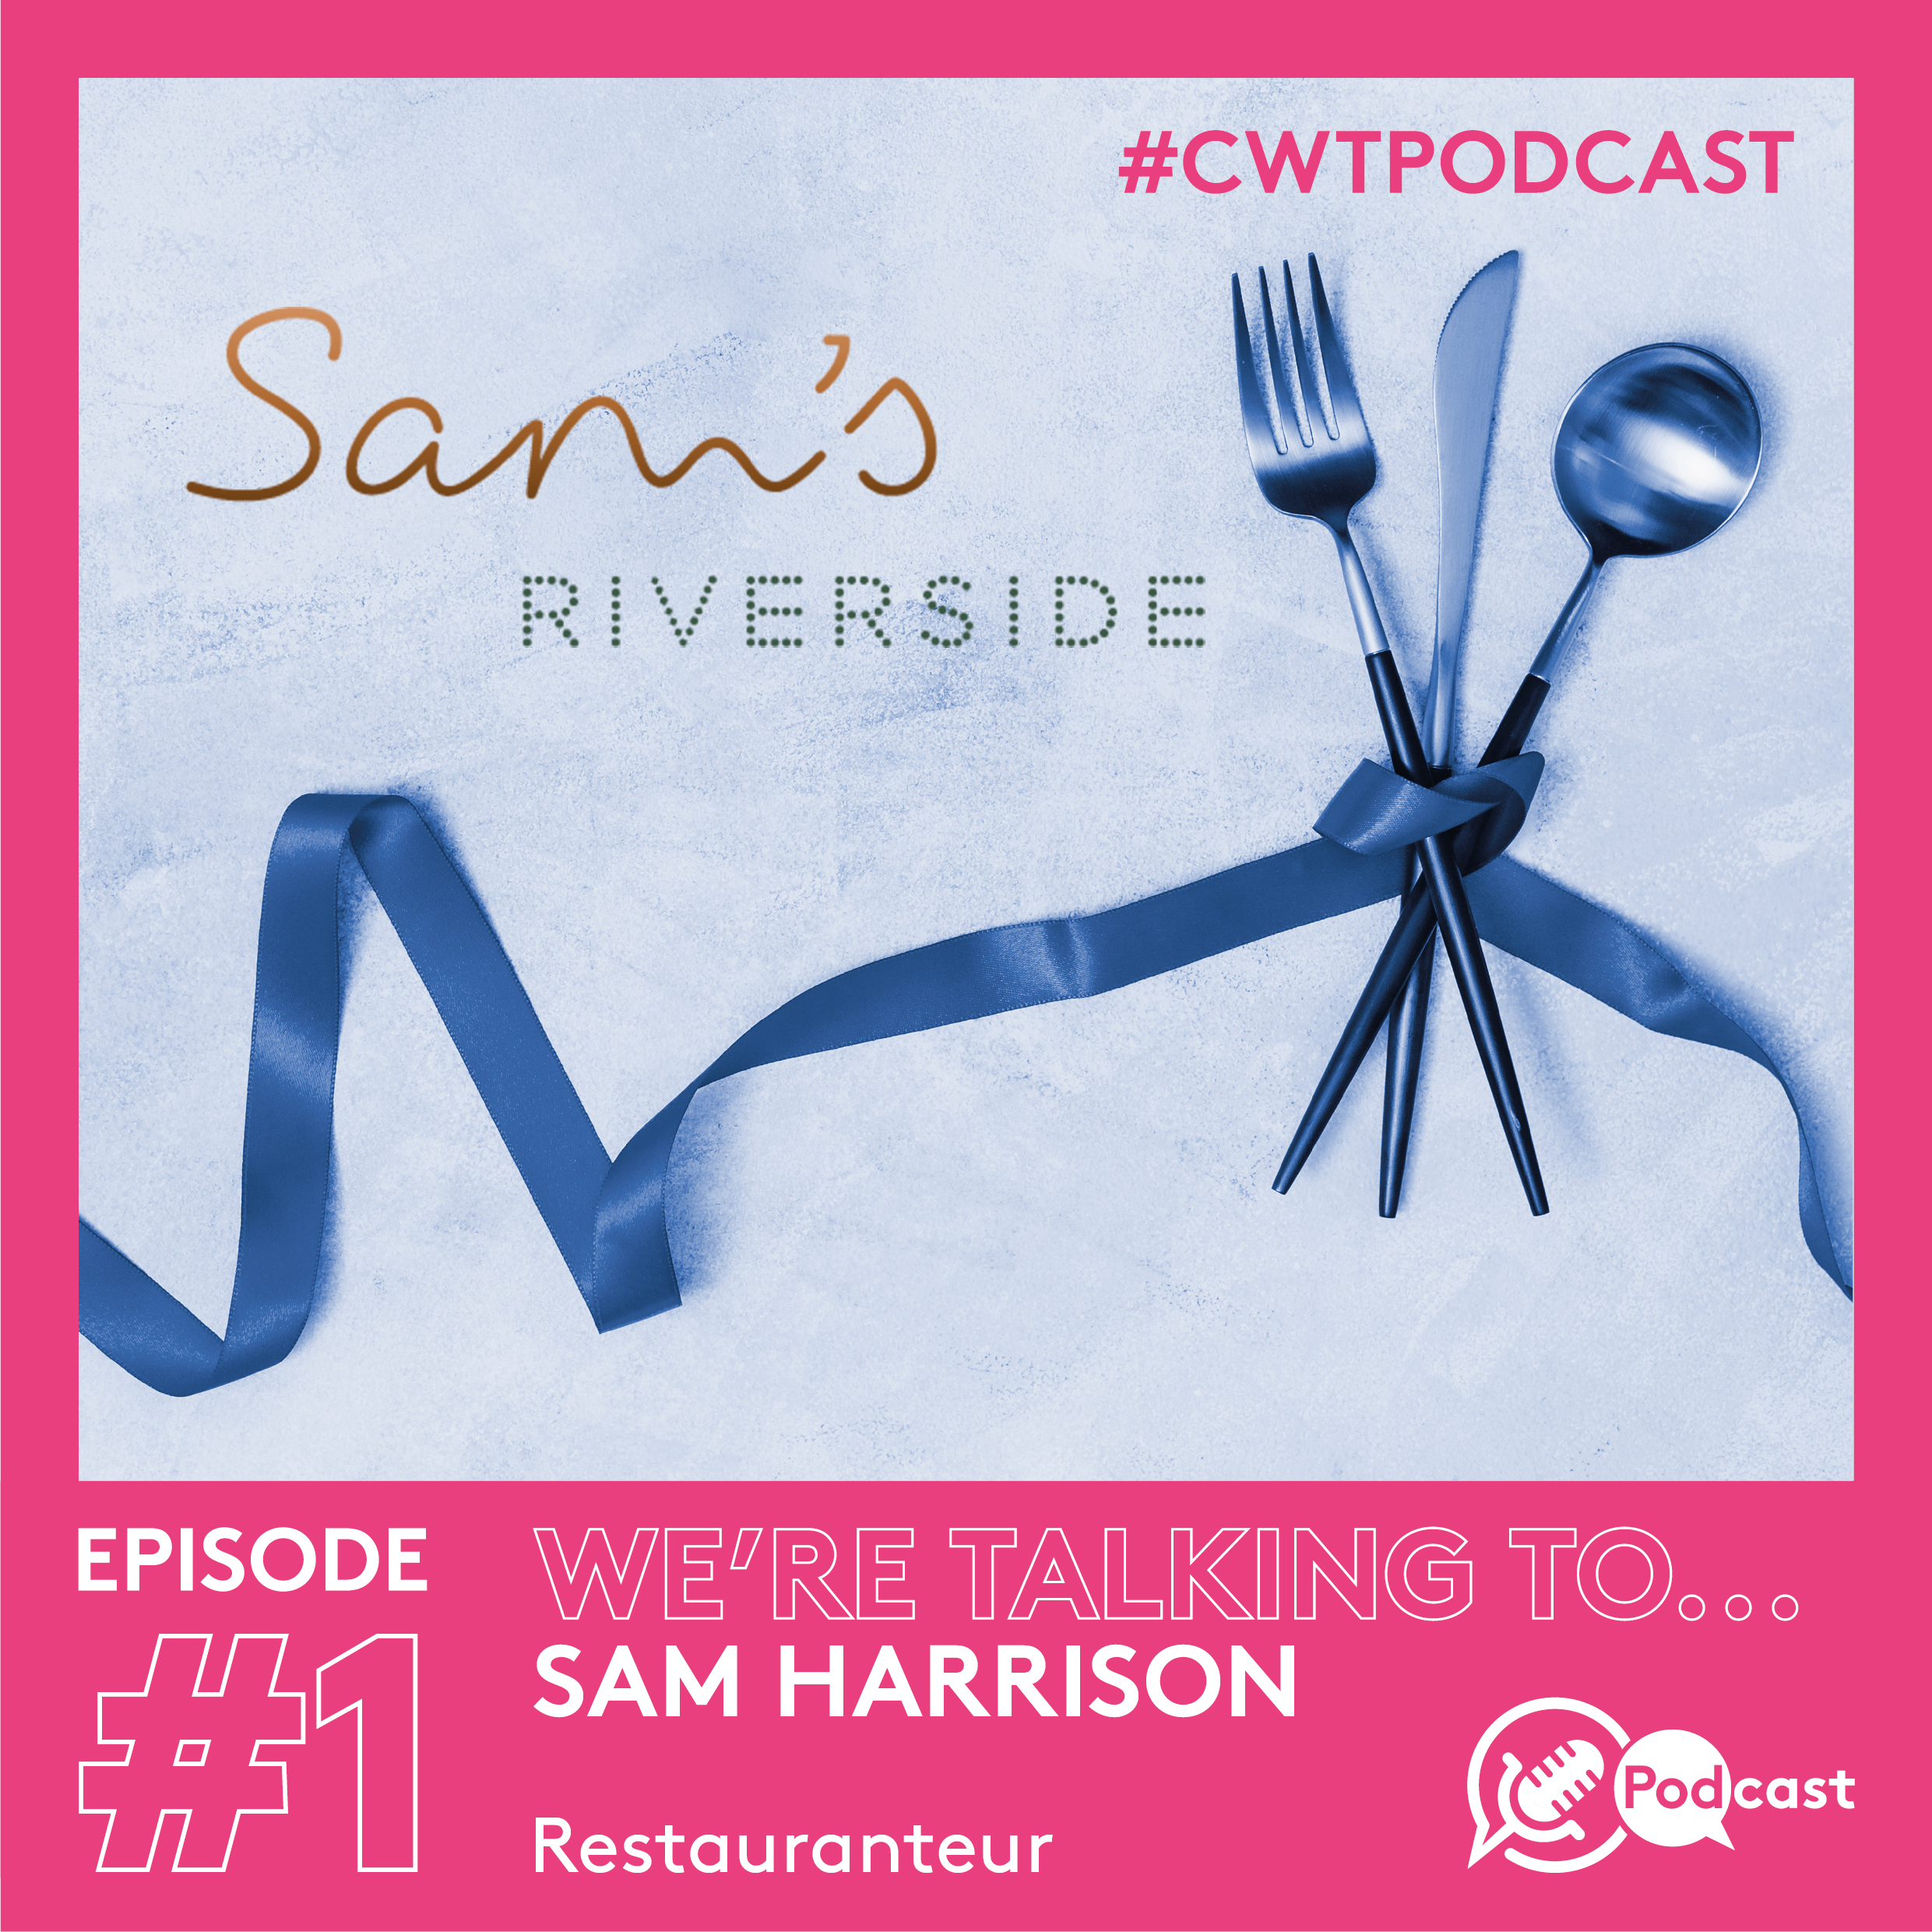 Image of Sam's riverside logo with a pink overlay which says Episode #1 and We're talking to Sam Harrison.